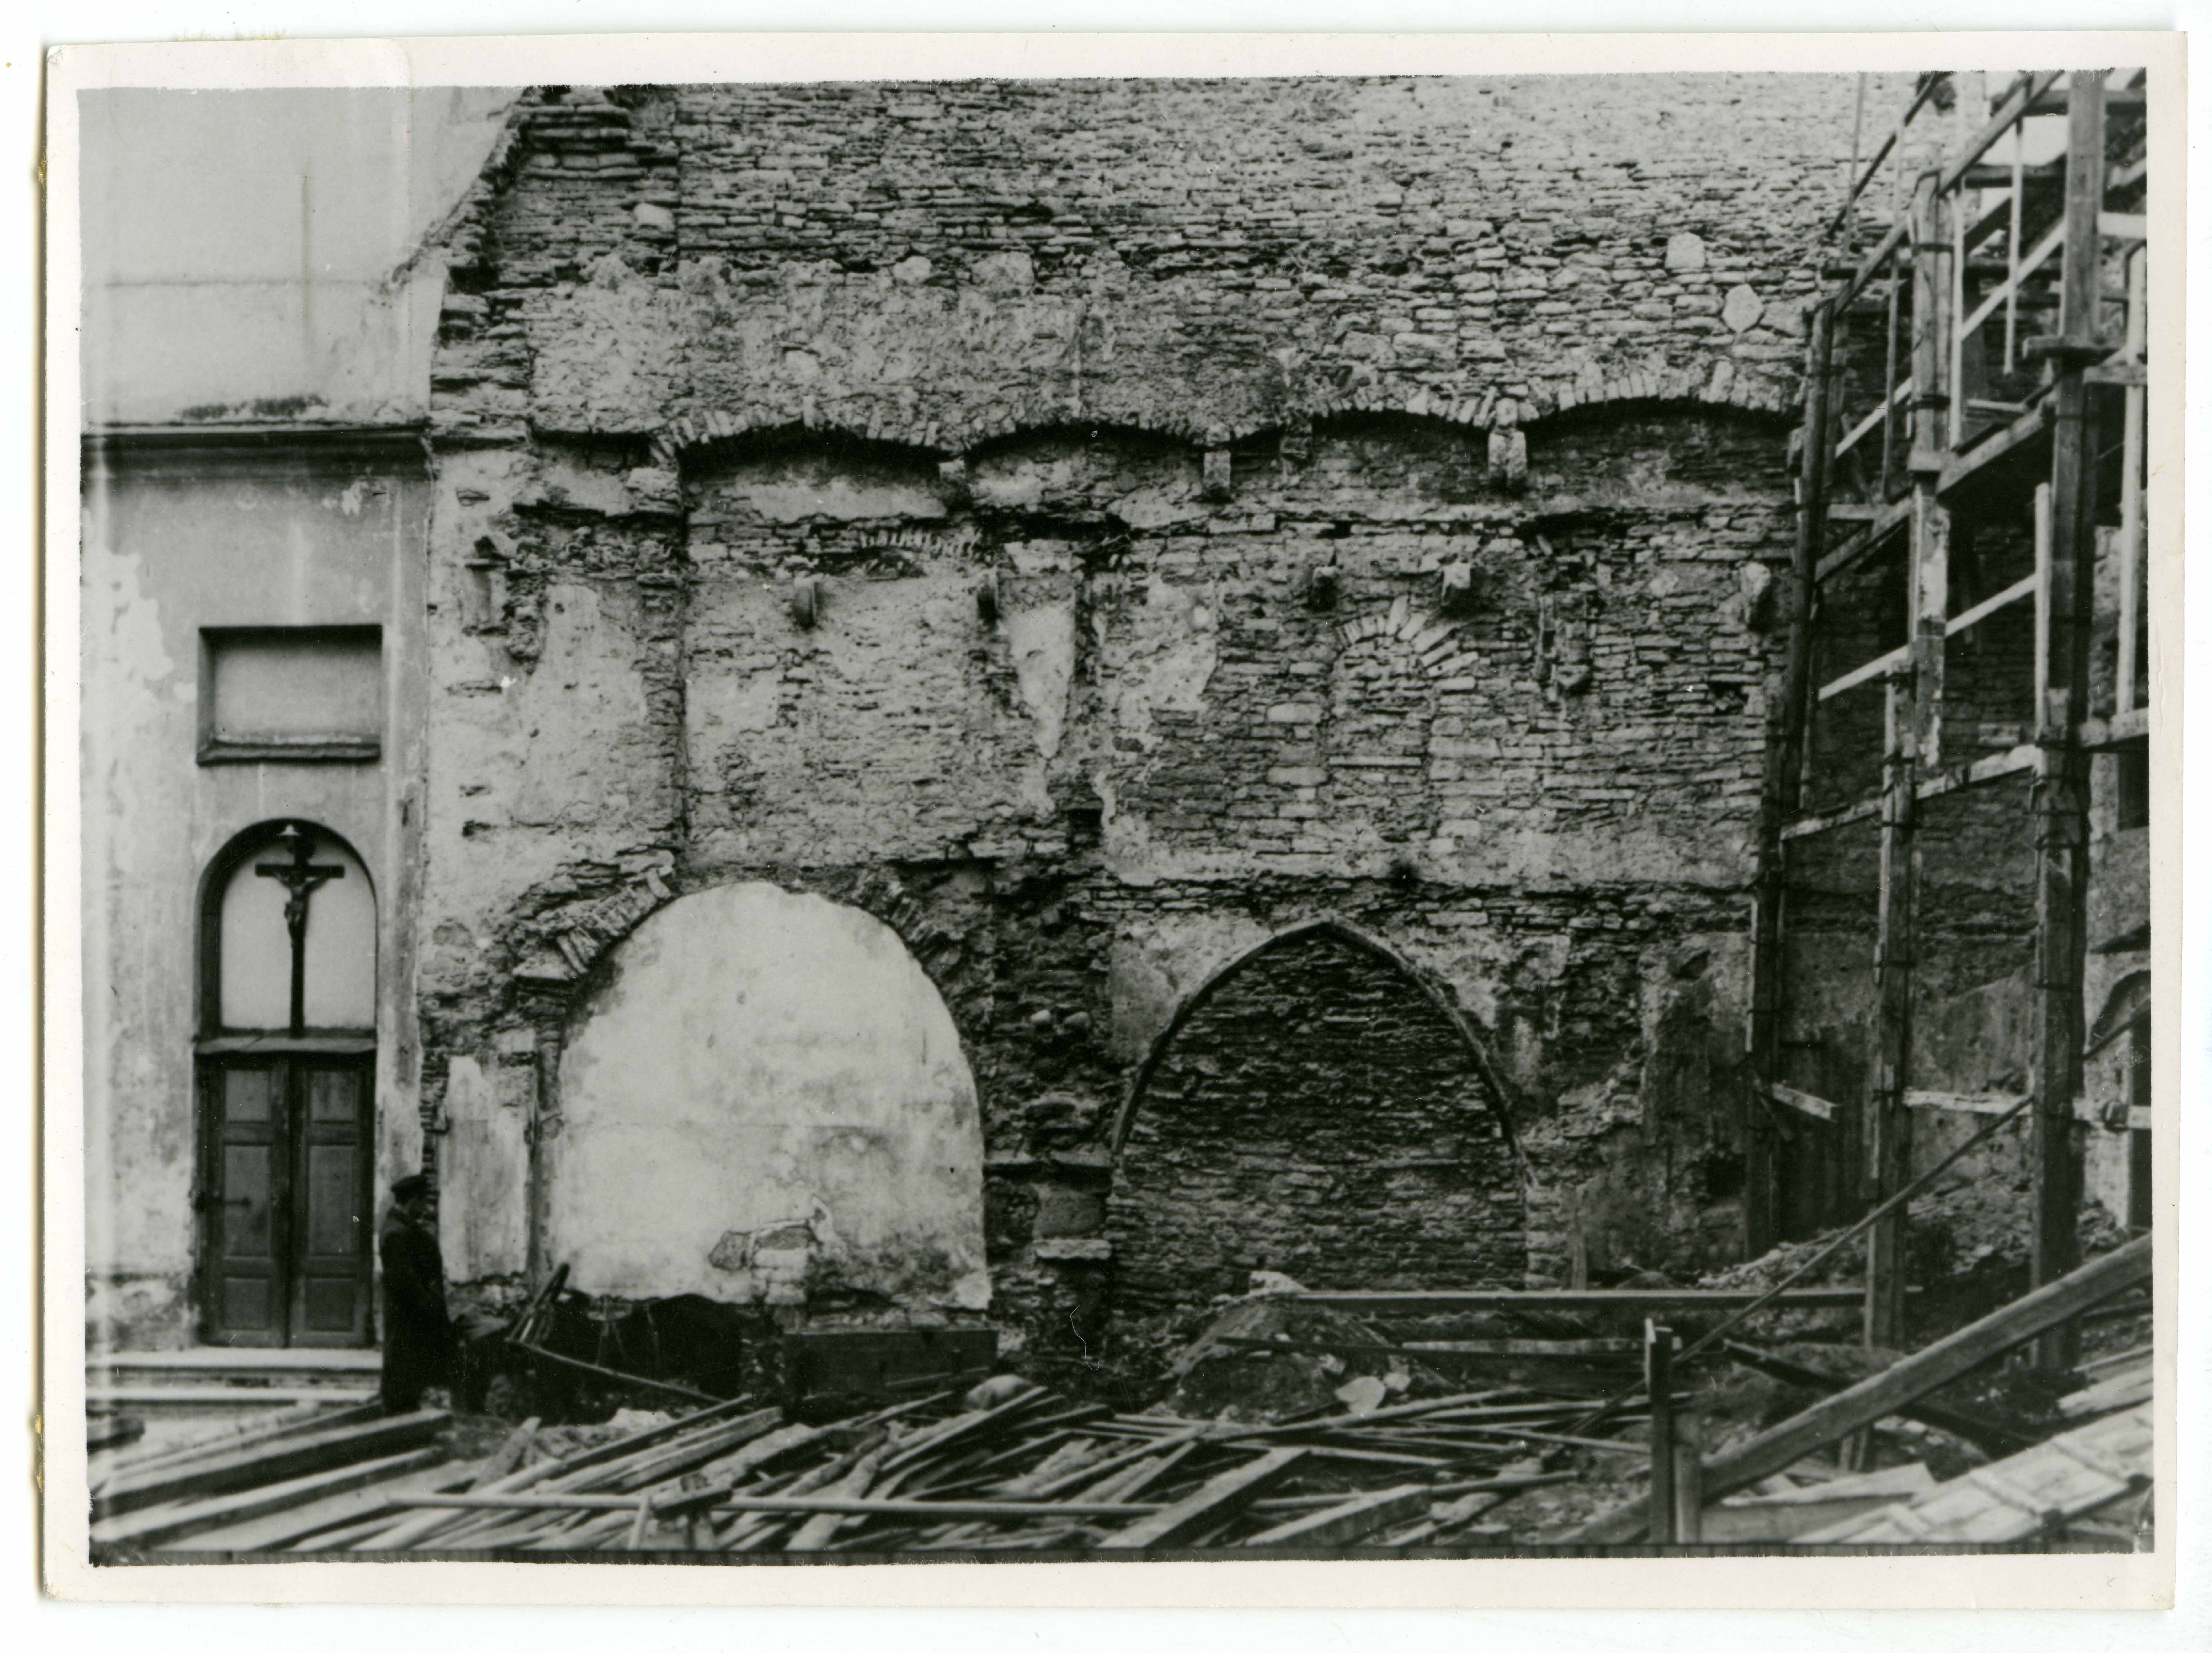 All-city. Dismantling the western stone of the Dominican monastery in 1920s.